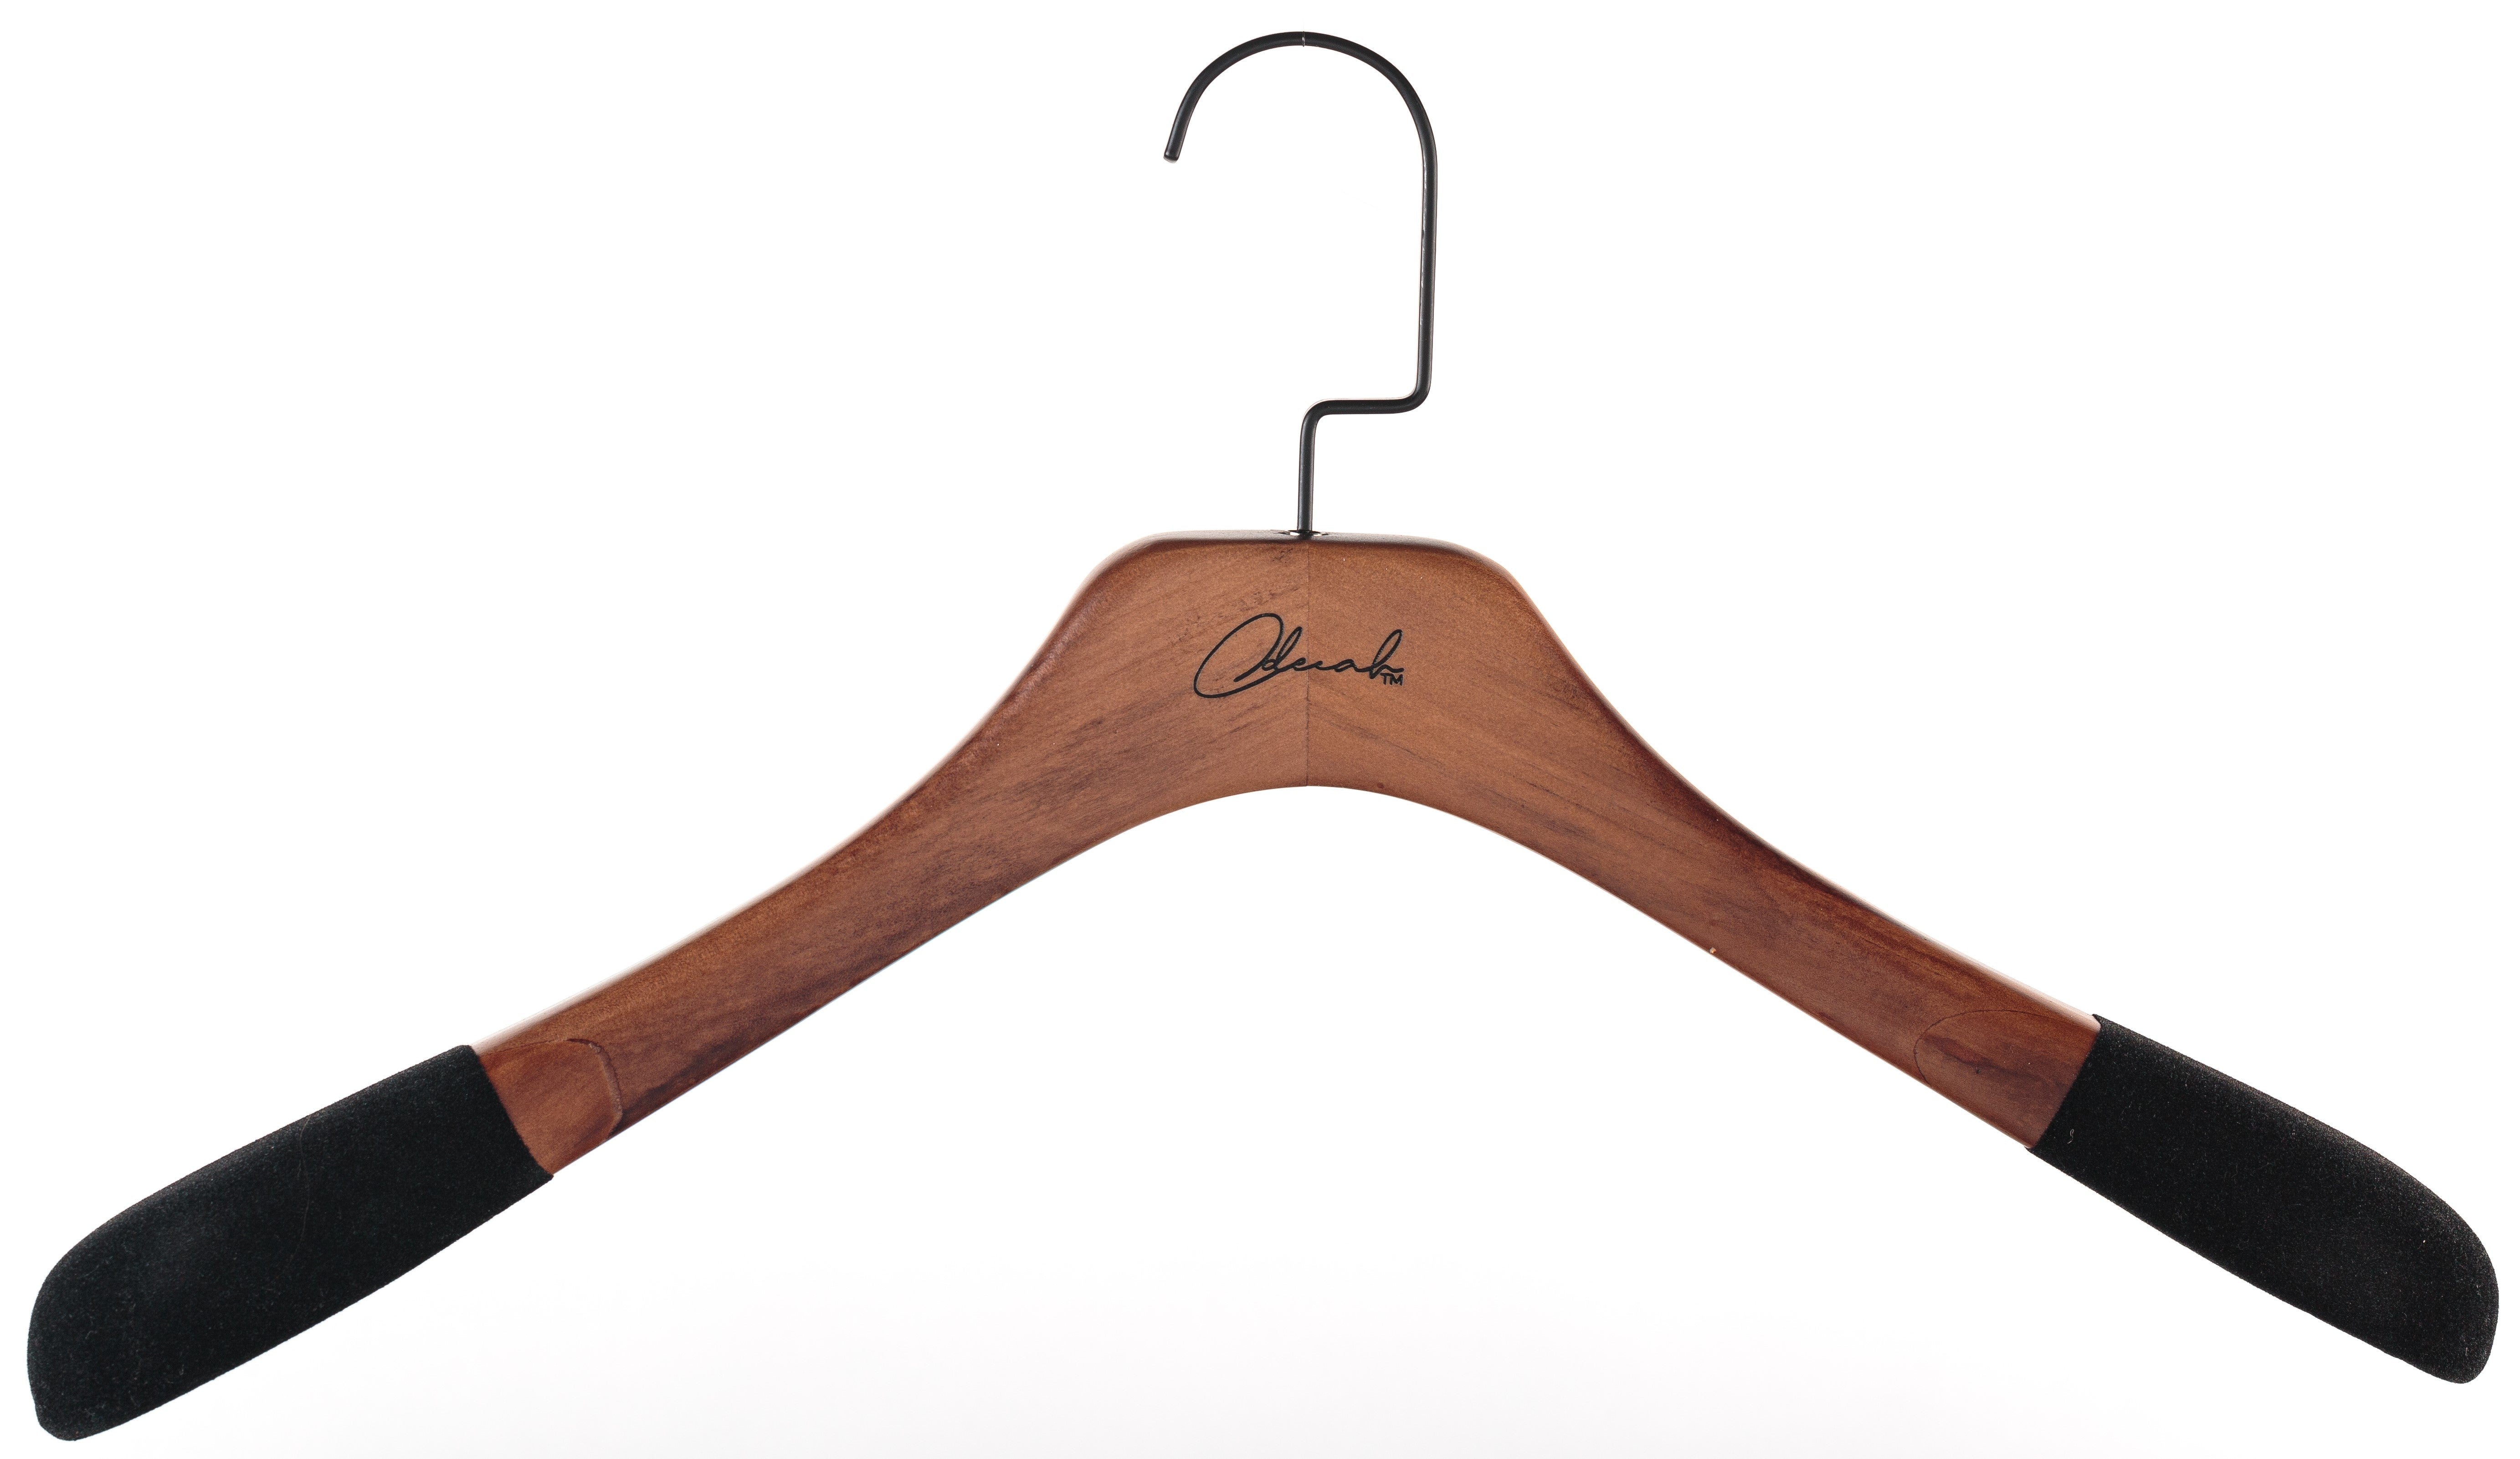 The Coat Hanger (2 or 4 or 6)